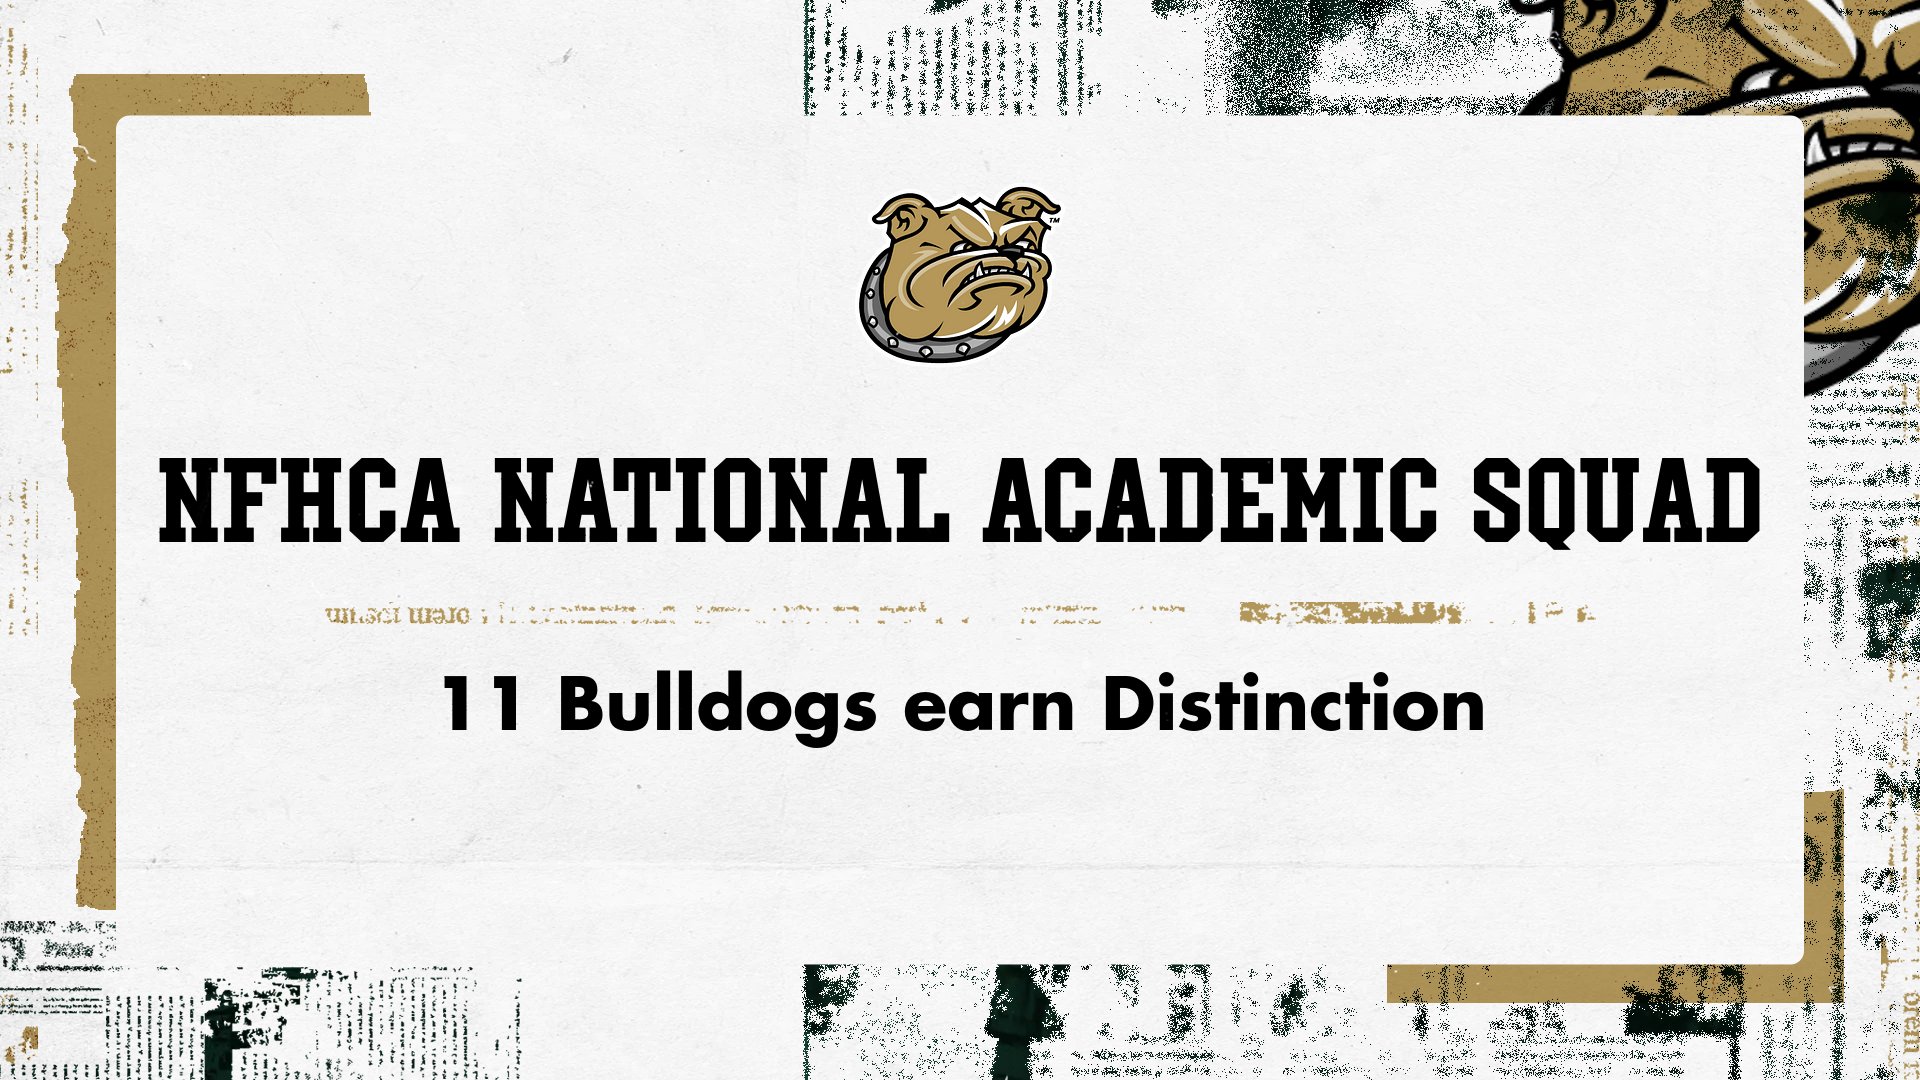 Bryant places 11 on NFHCA National Academic Squad